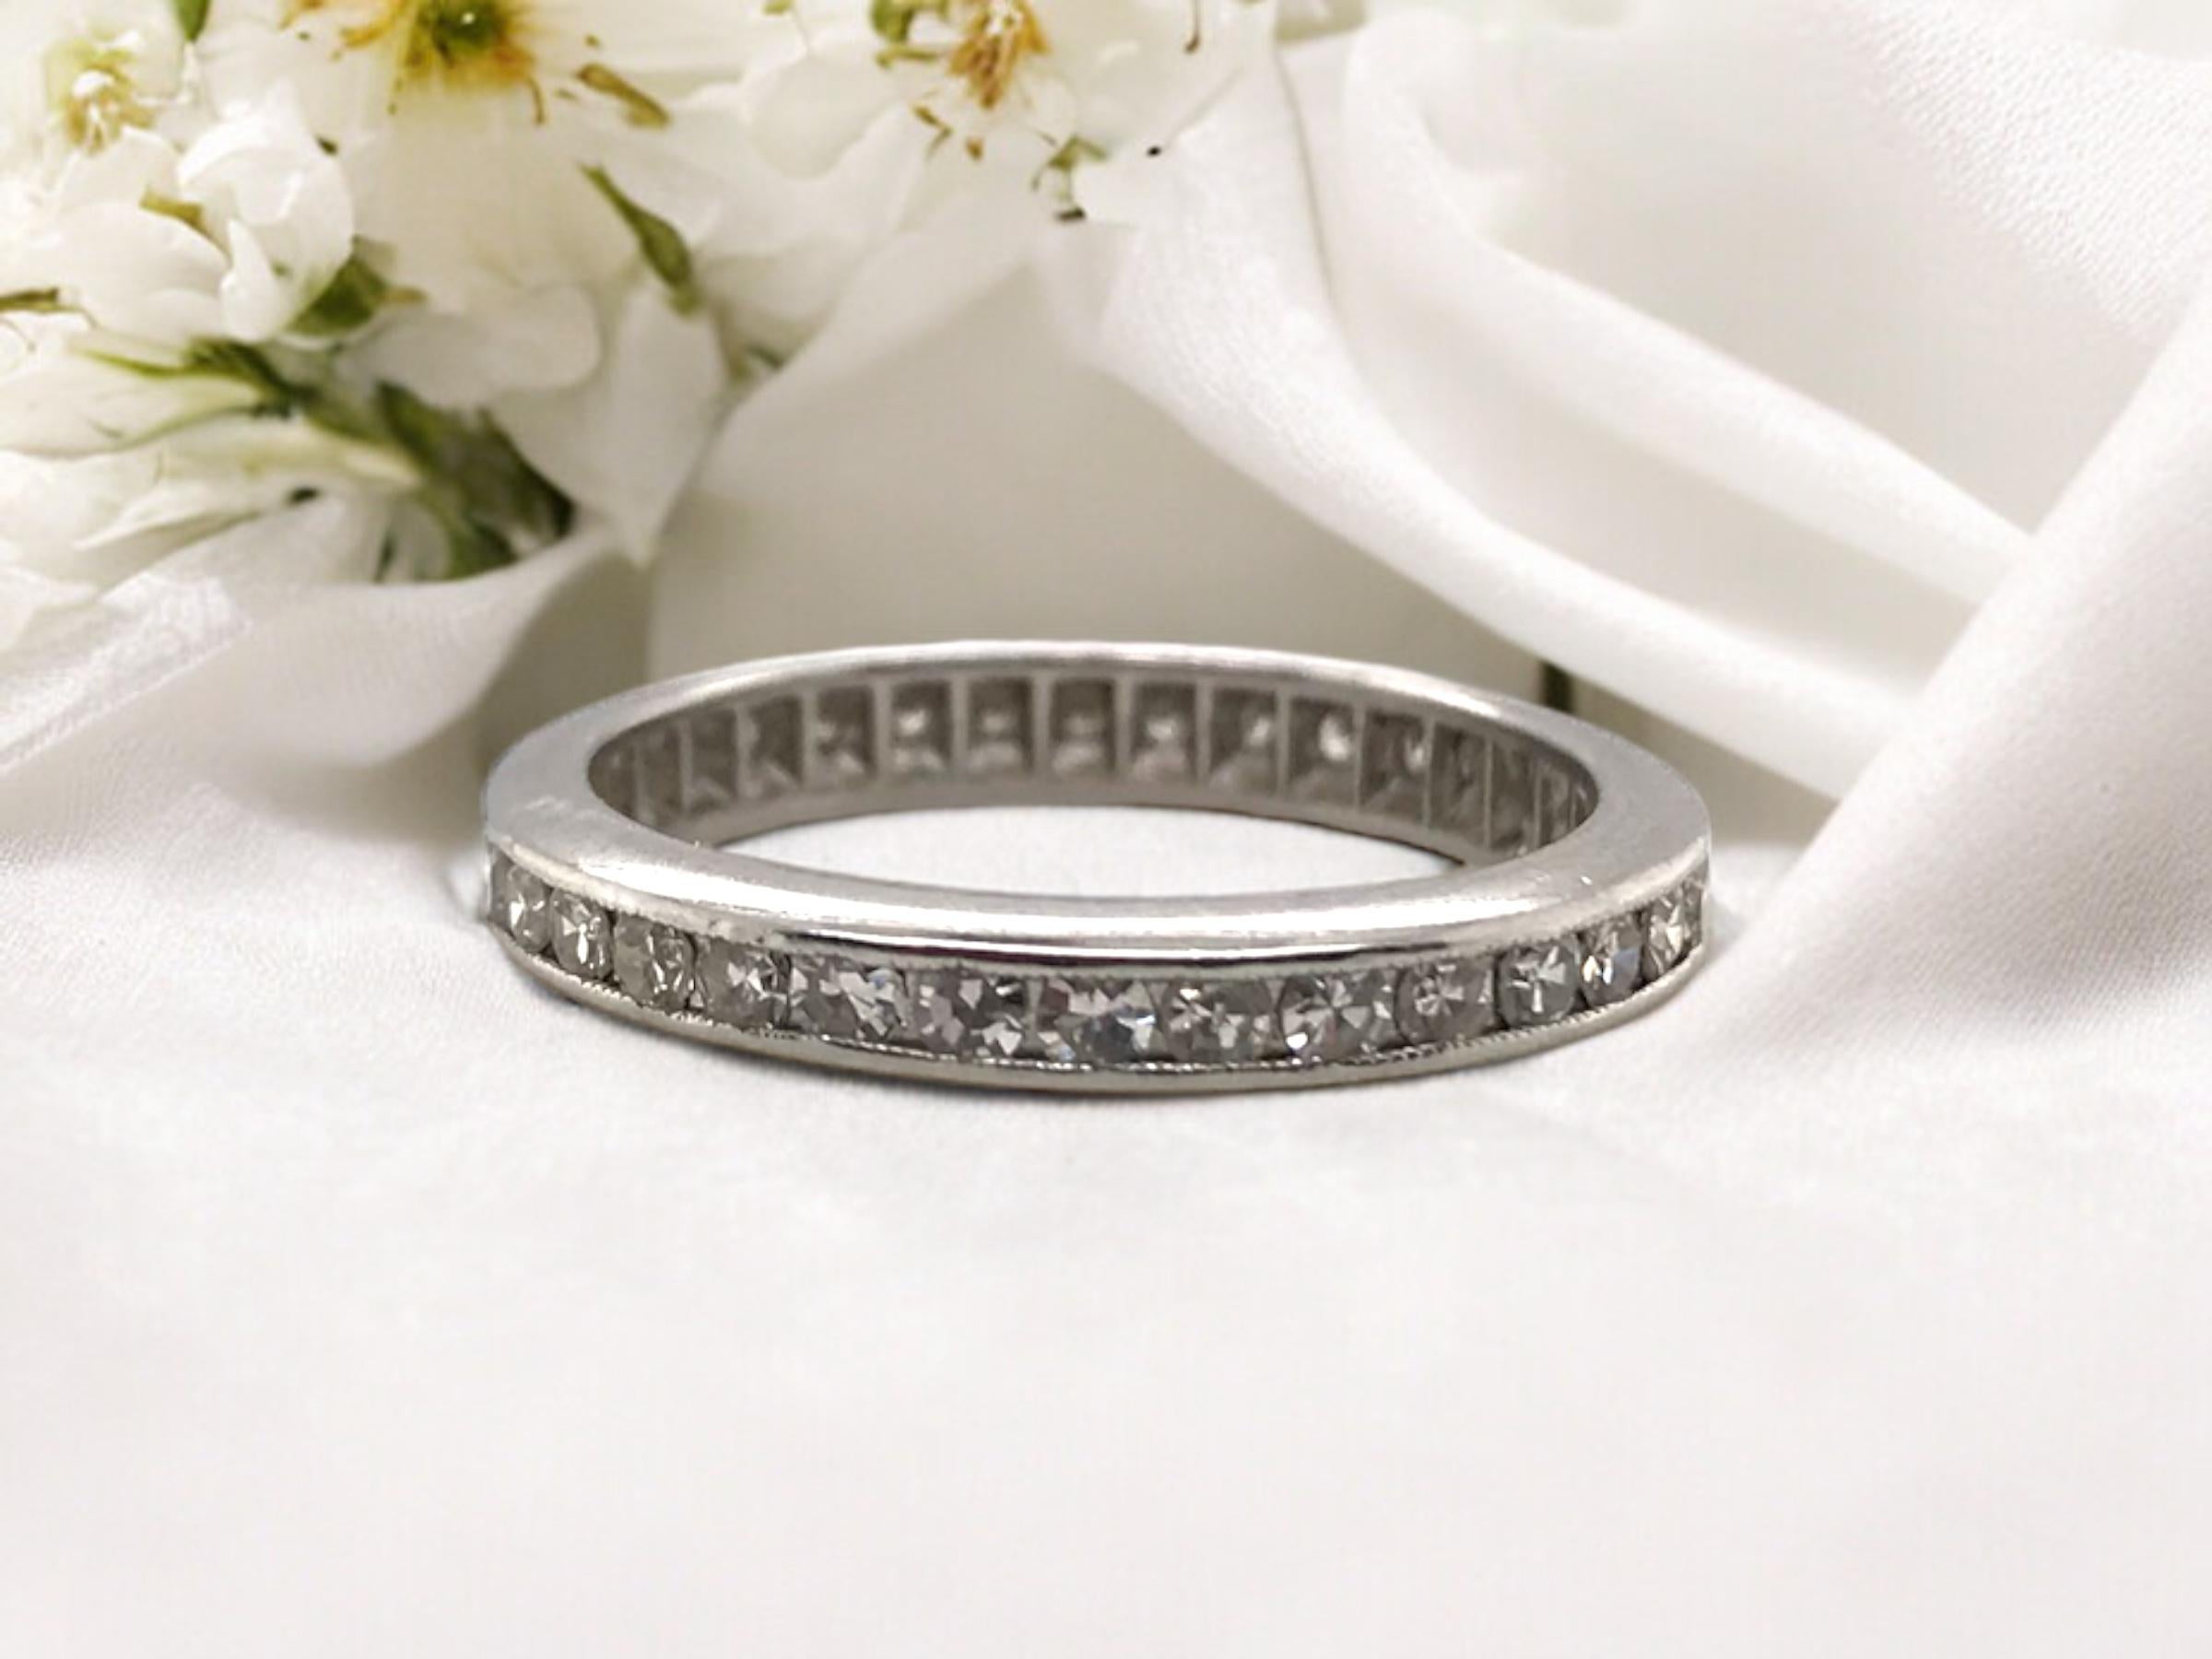 Such a classic piece!
This band is sure to go with any stack.

Ring Details
Material: Platinum
Era: Art Deco 1910 - 1930
Weight:  3.7 Grams
Width: 2.8mm
Height: 1.75mm
Finger Size: 6
Unfortunately Eternity Bands Are Not Sizable

Accented by the